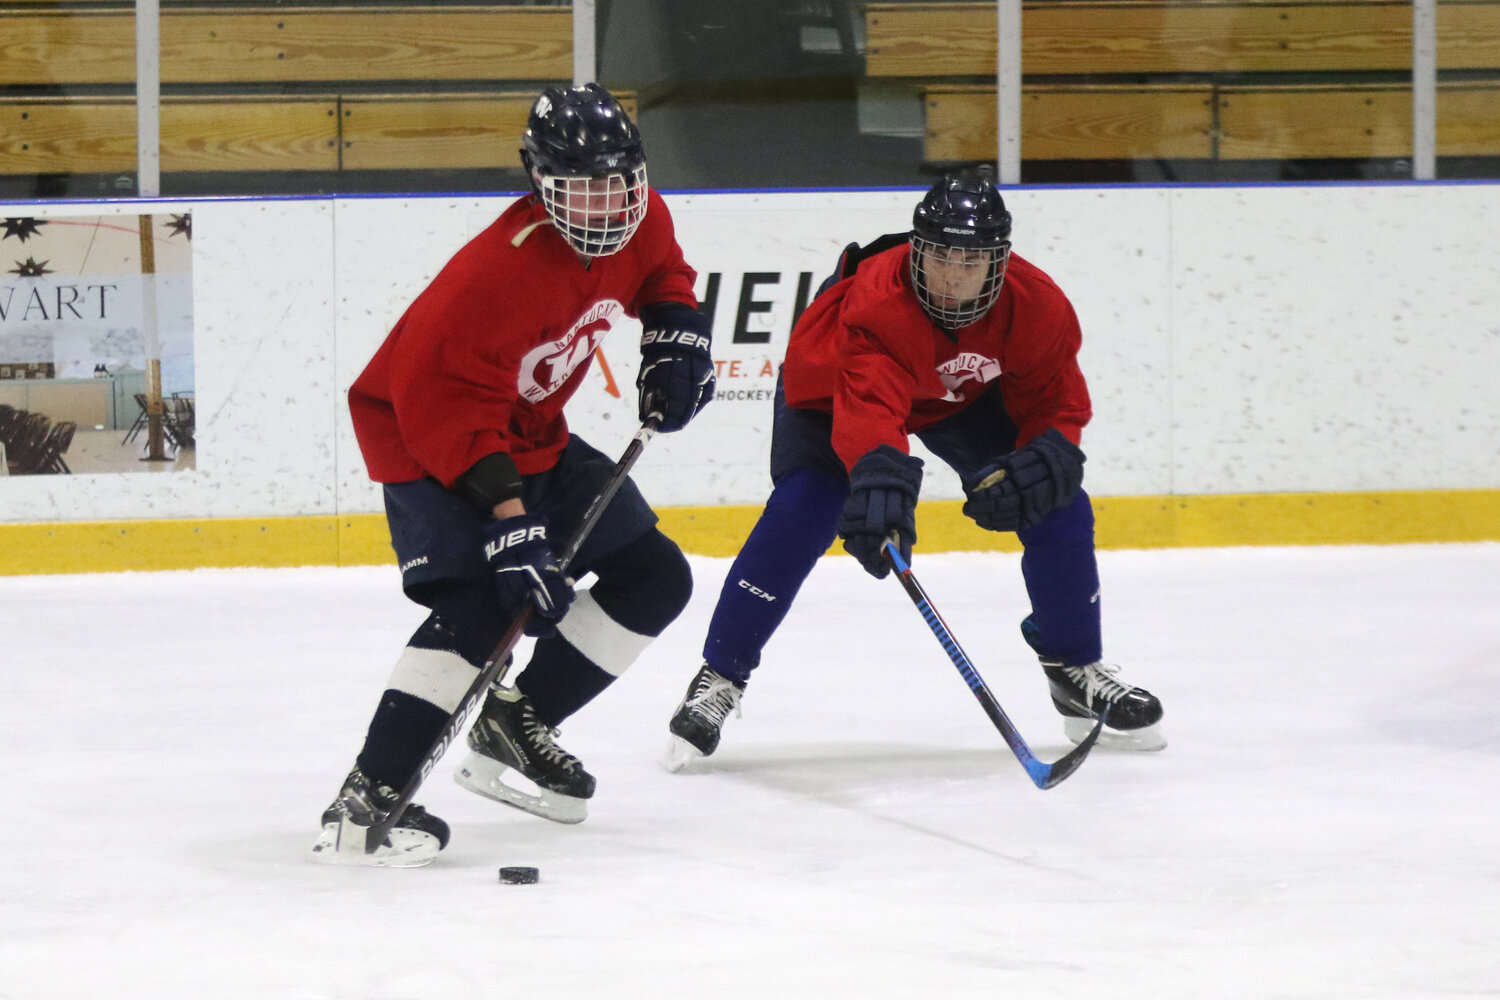 Mike Culkins, left, shields the puck from Brock Beamish at boys hockey practice Monday. The Whalers open the season at home Sunday against Norwell.